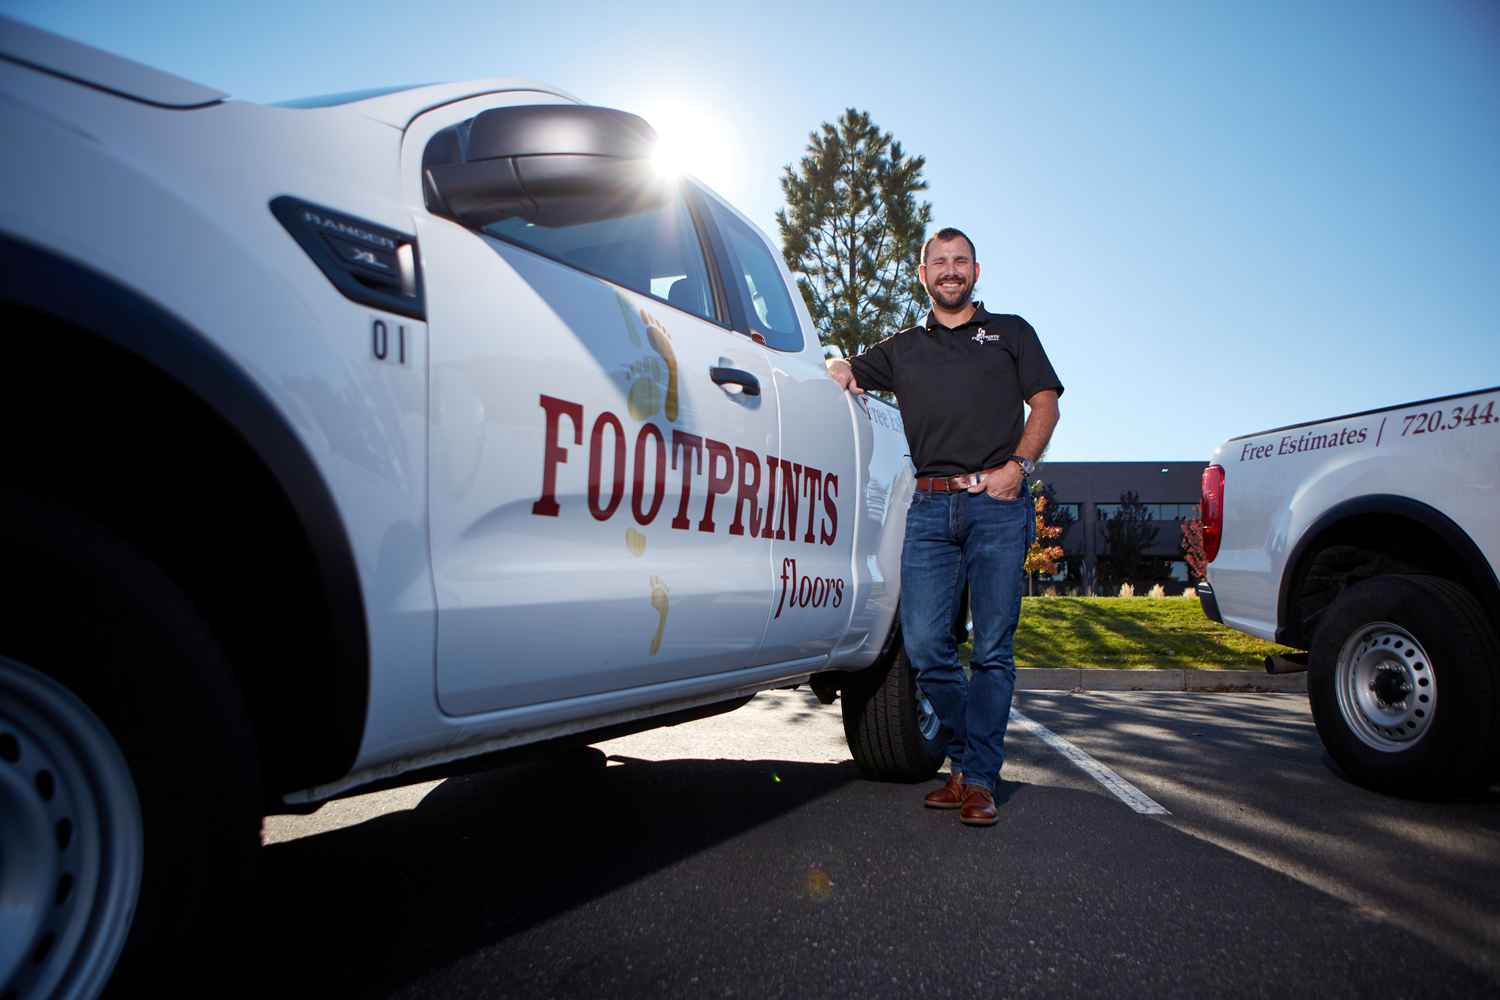 Footprints Floors is ready to help you with any of your flooring needs in Charlotte.